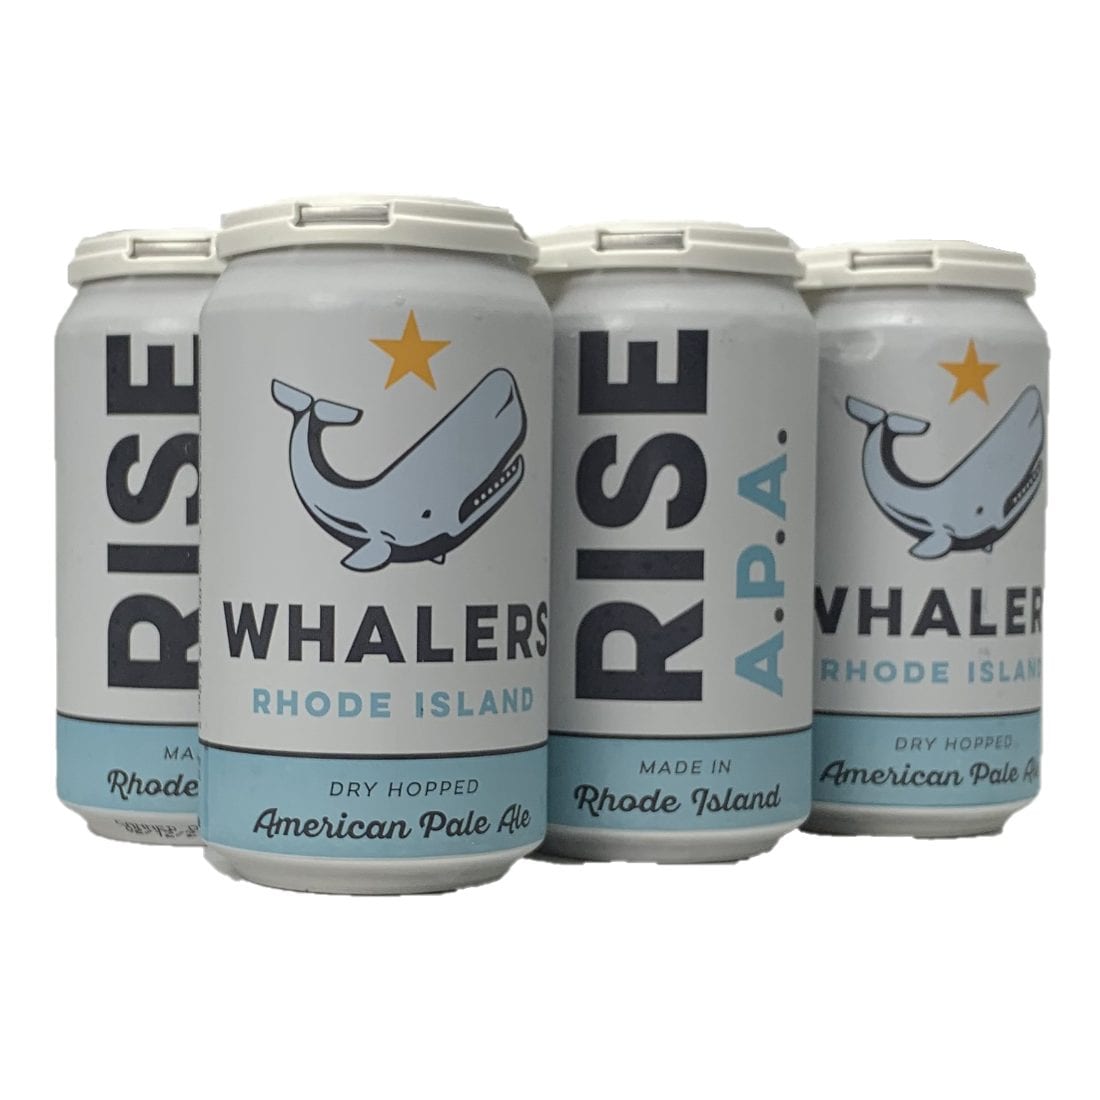 https://www.colonialspirits.com/wp-content/uploads/2020/06/Whalers-rise-6-cans.jpg